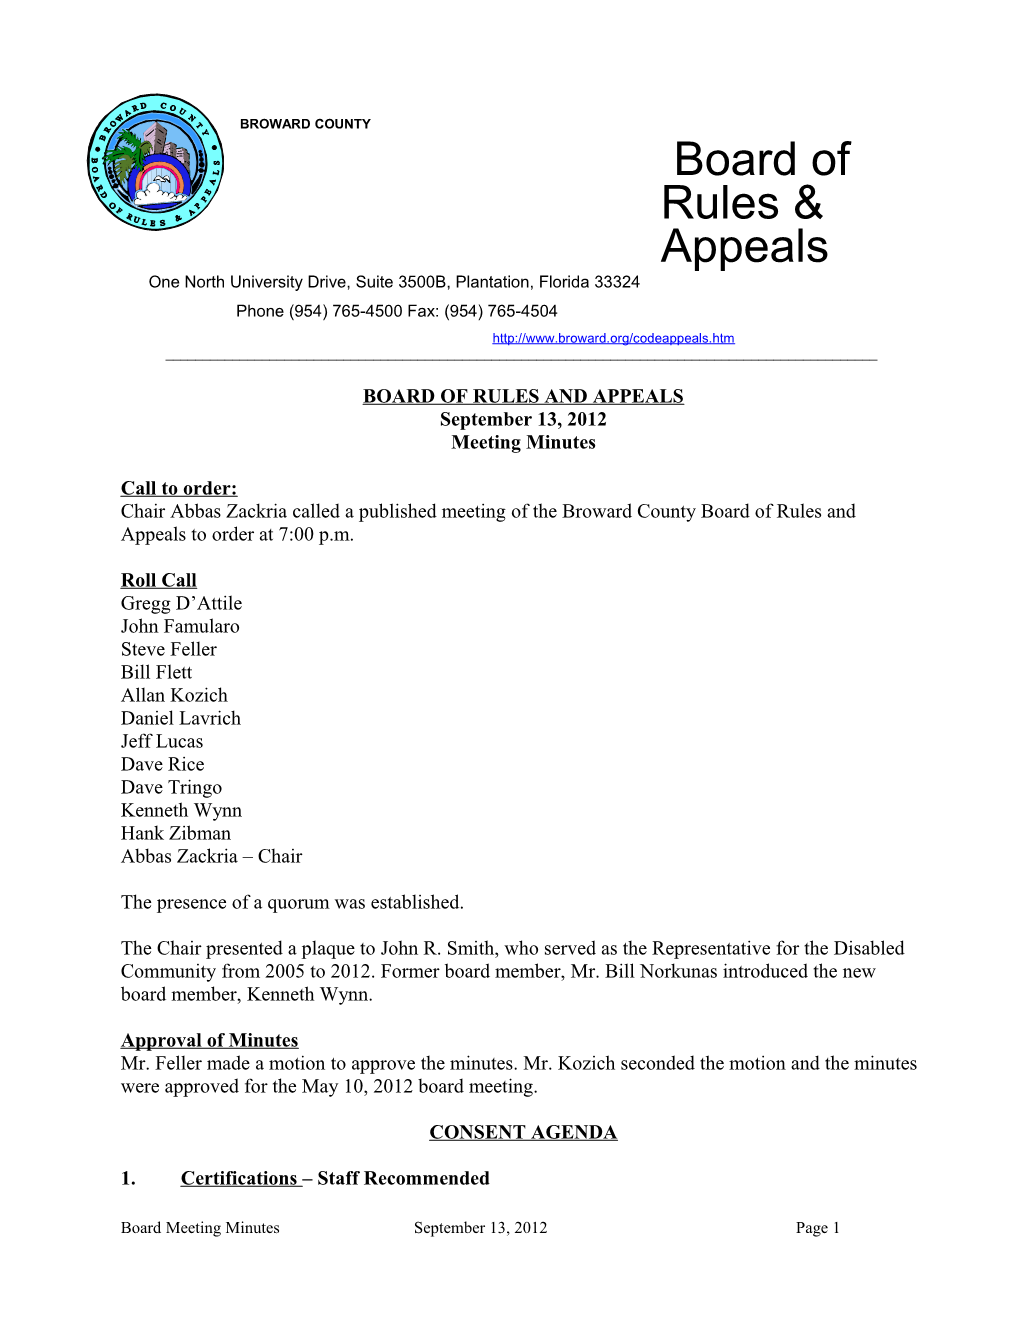 Board of Rules and Appeals